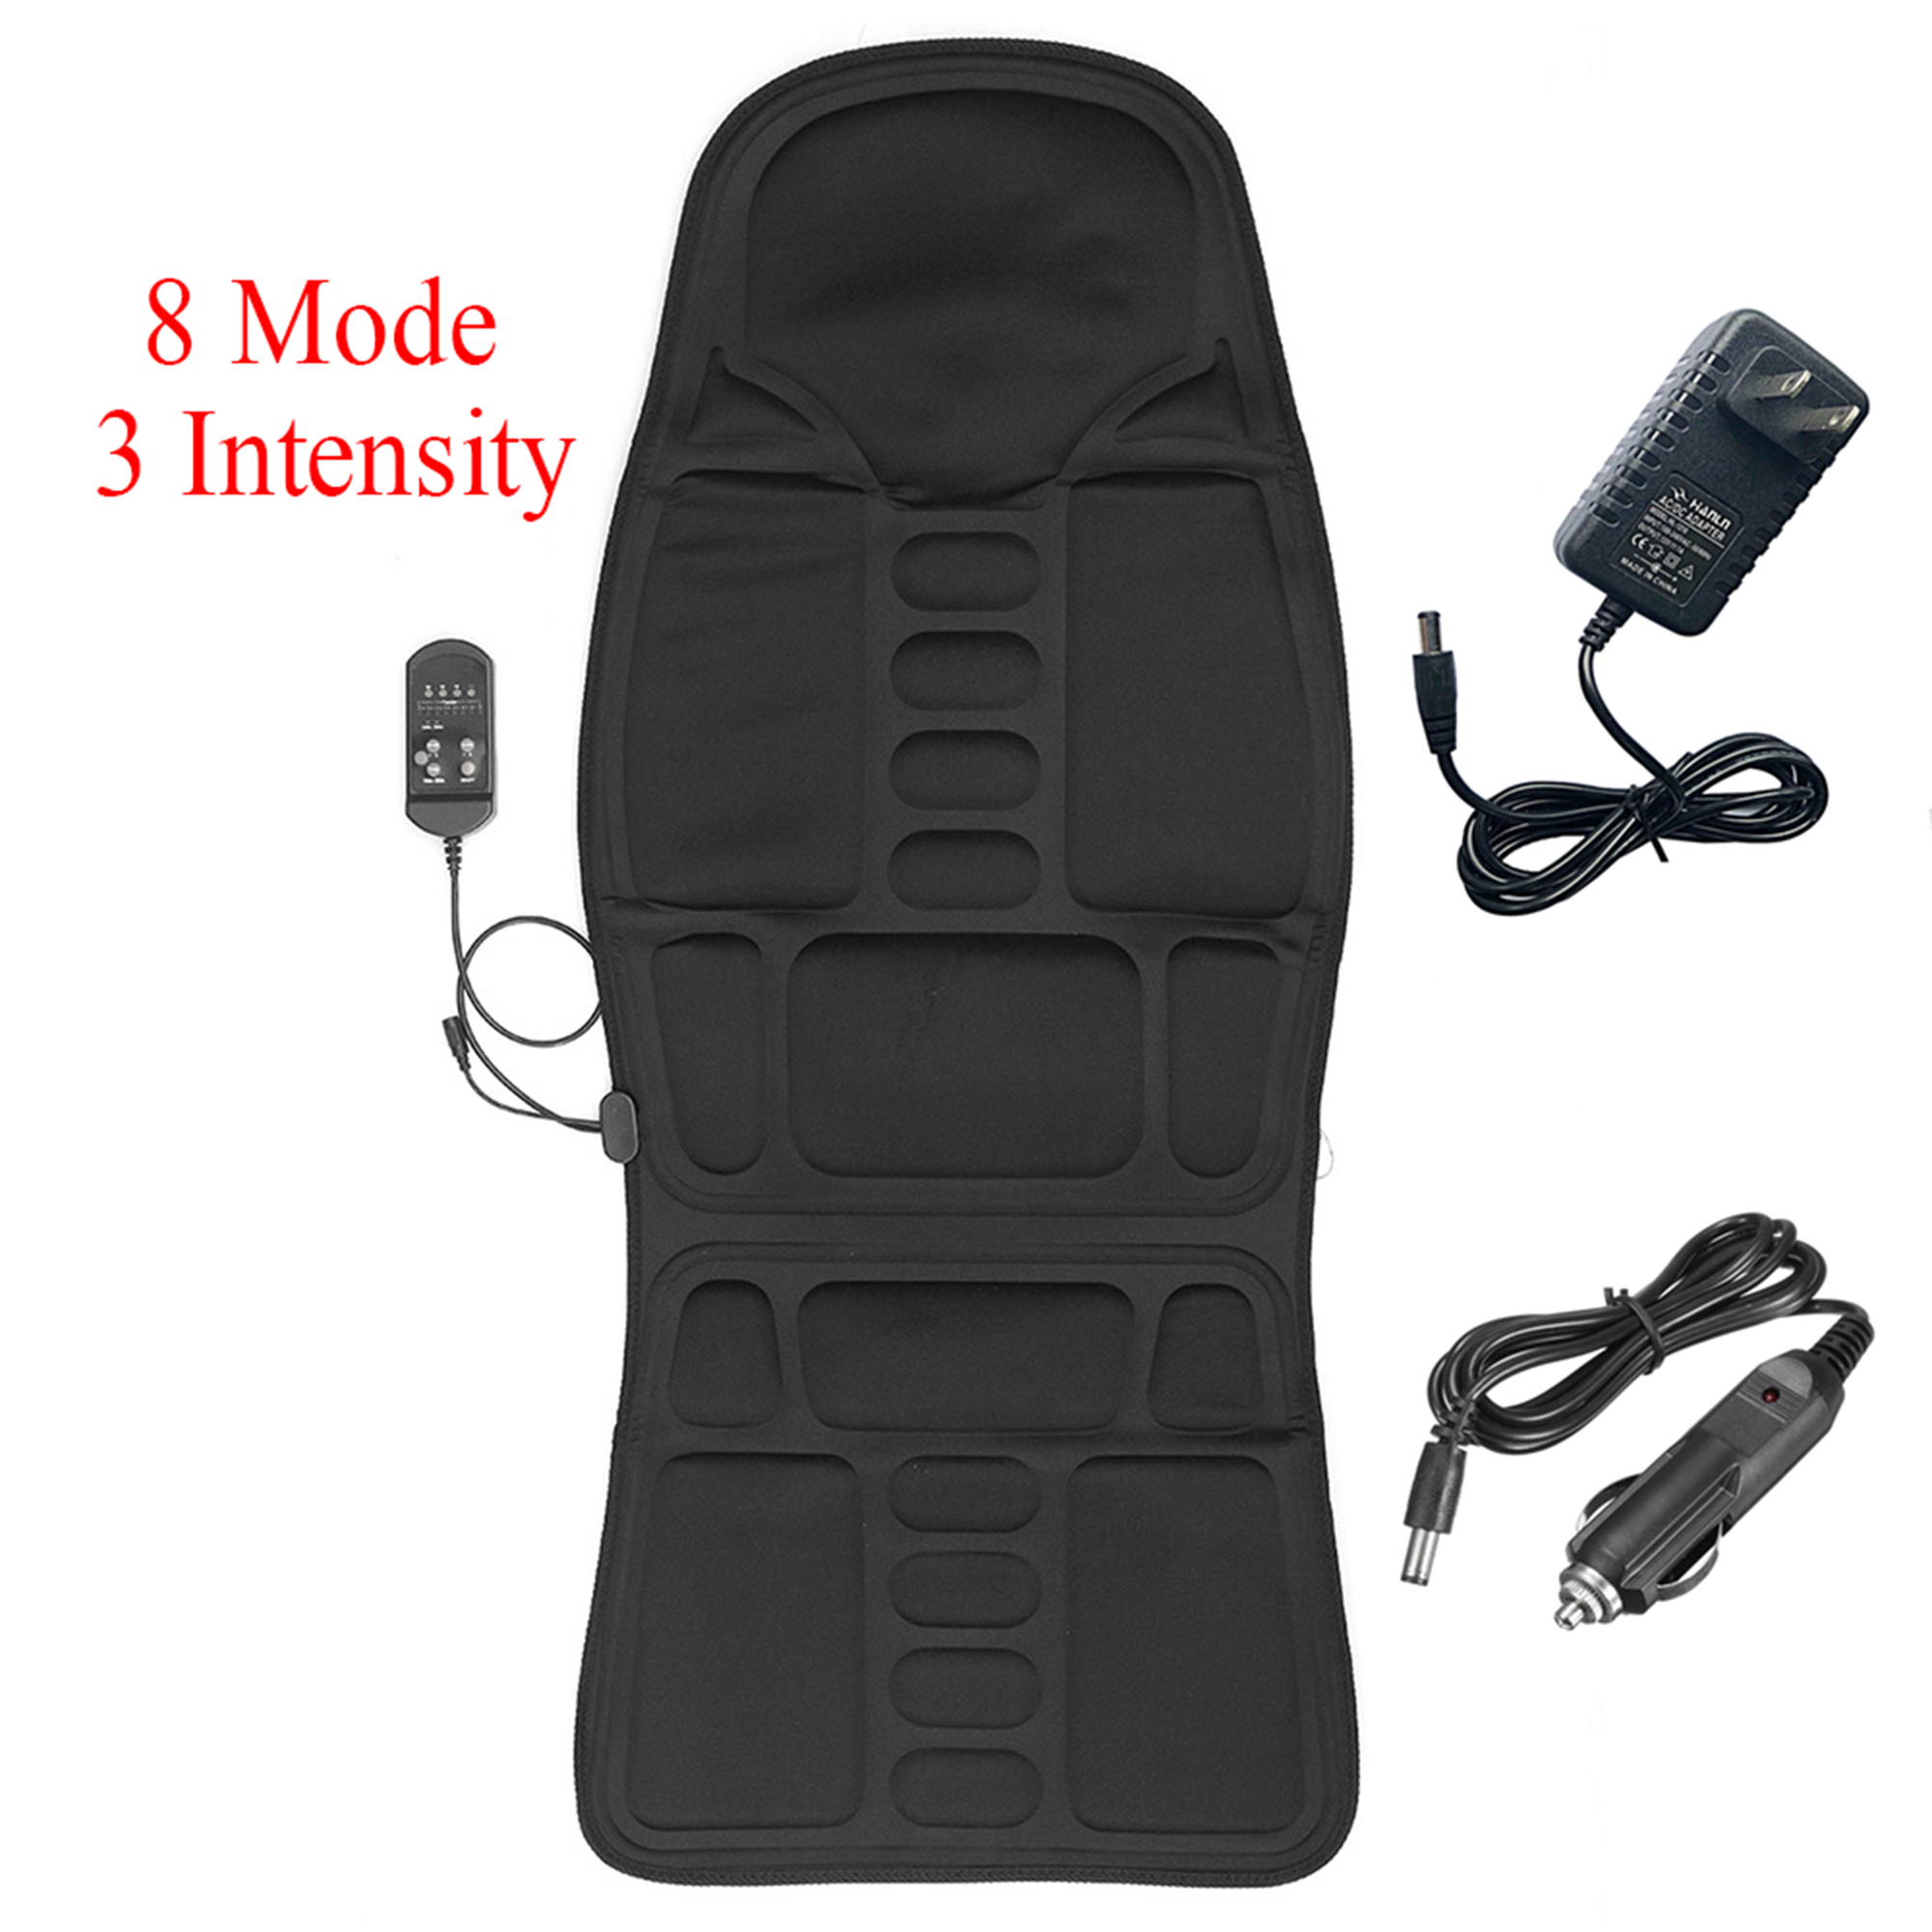 Youloveit Car Home Chair Seat Shiatsu Back and Neck Massager with Heat Kneading Massage at Home, Car, Office Massage Shiatsu Massagers Relieve Muscle Pain for Back Shoulder and Neck - image 3 of 7